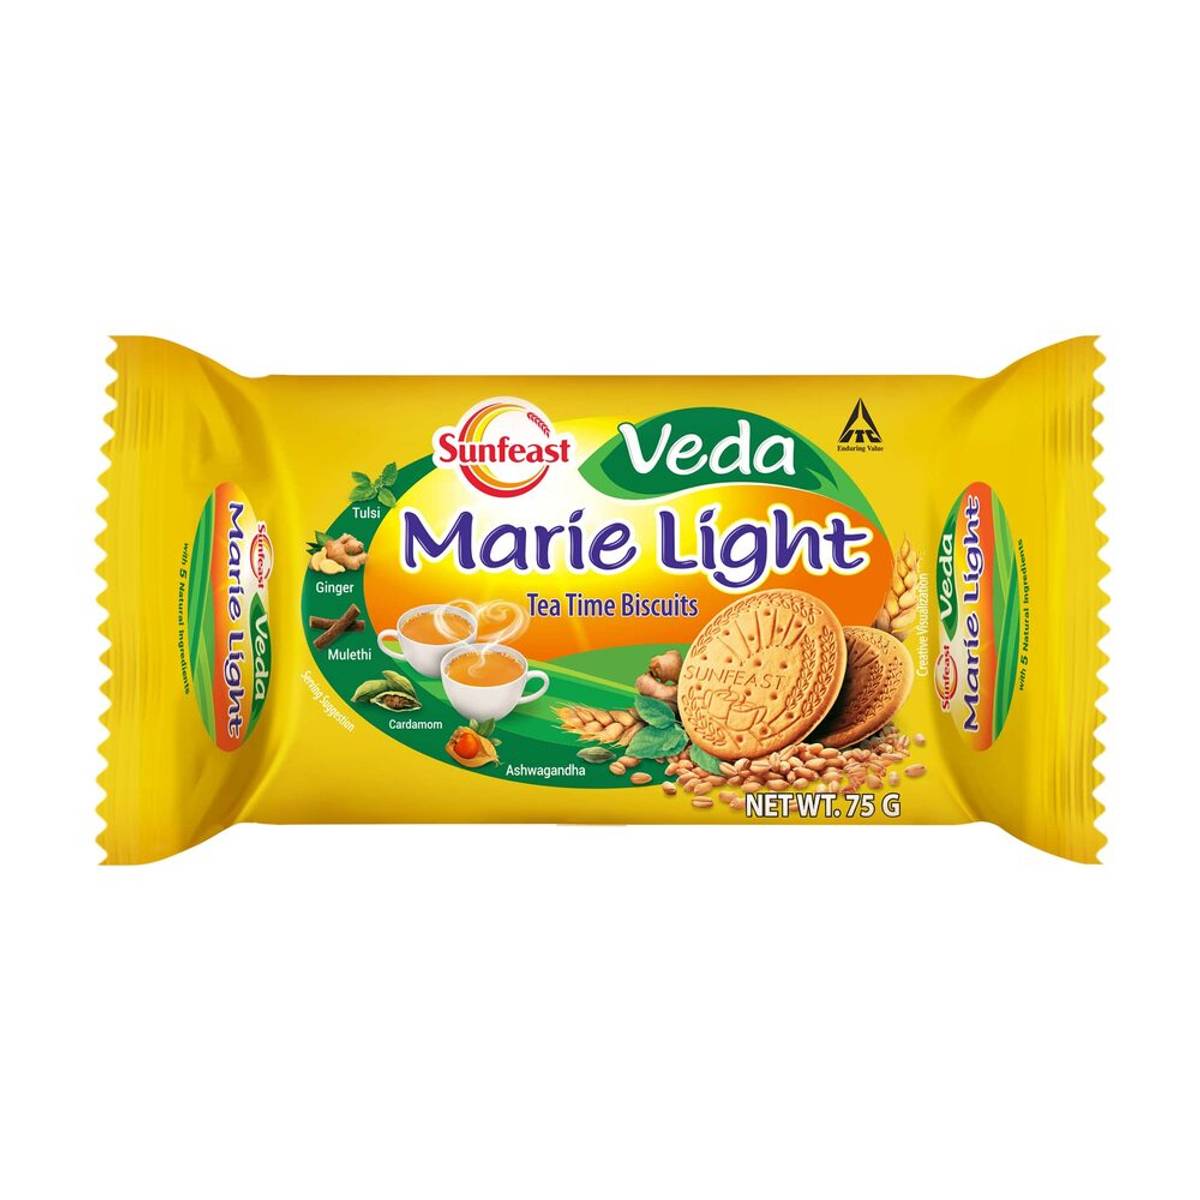 Sunfeast Veda Marie Light Biscuit 63G